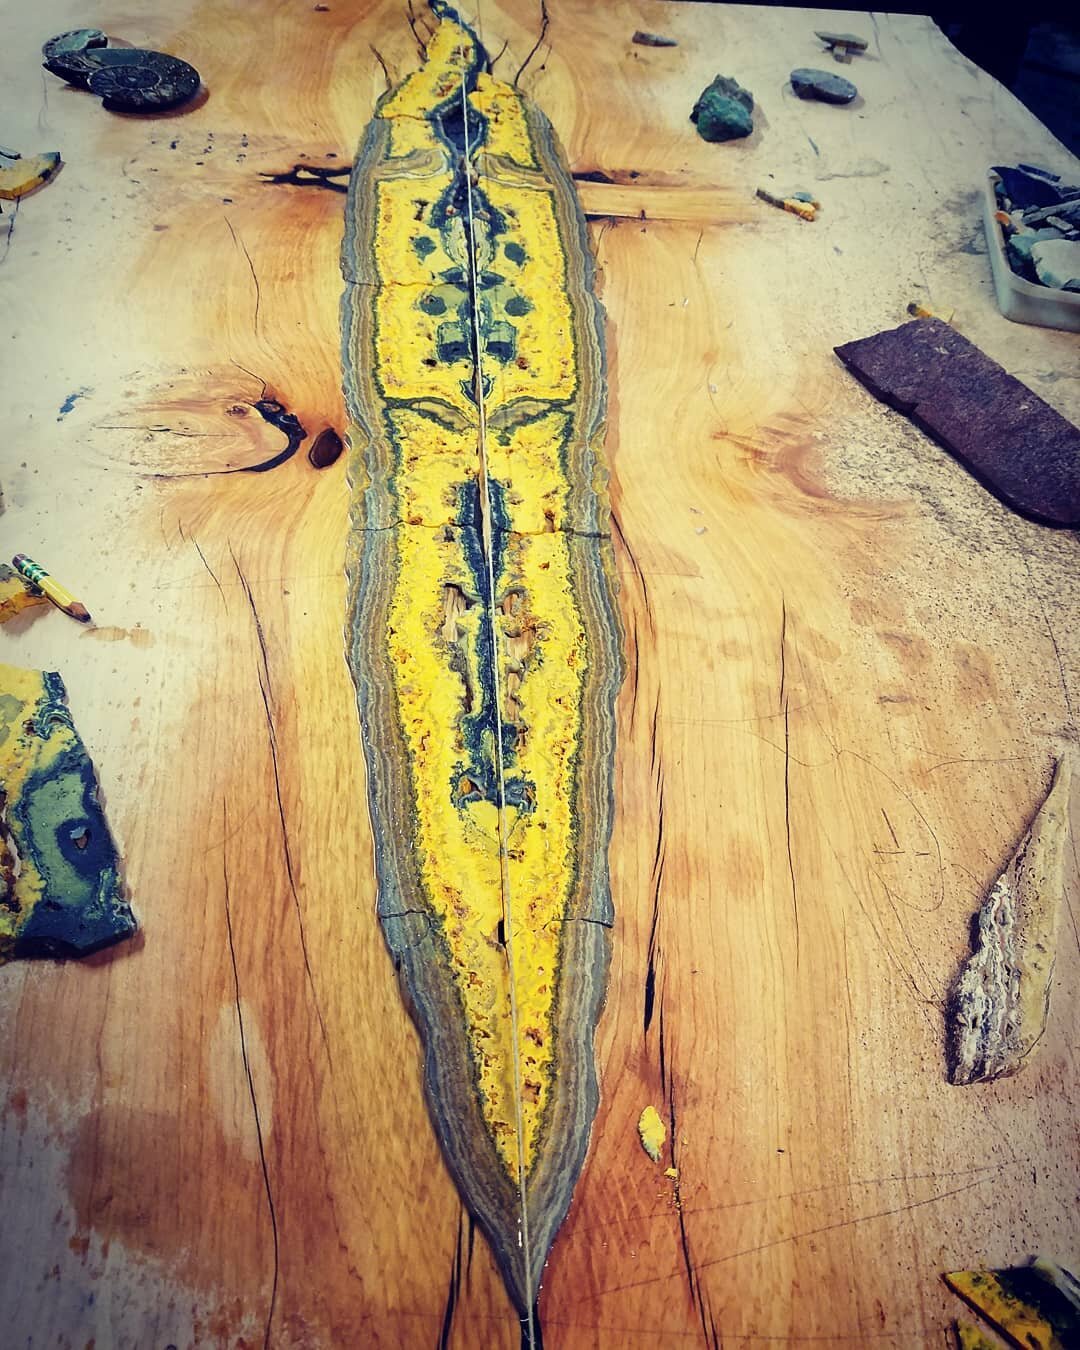 This is such a beautiful piece of Bumblebee Jasper! It reminds me of a snake skin. Can't wait to see it all polished up!

#bumblebeejasper #liveedge #aligatorjuniper #makersgonnamake #inlay #functionalart #decor #stonedecor